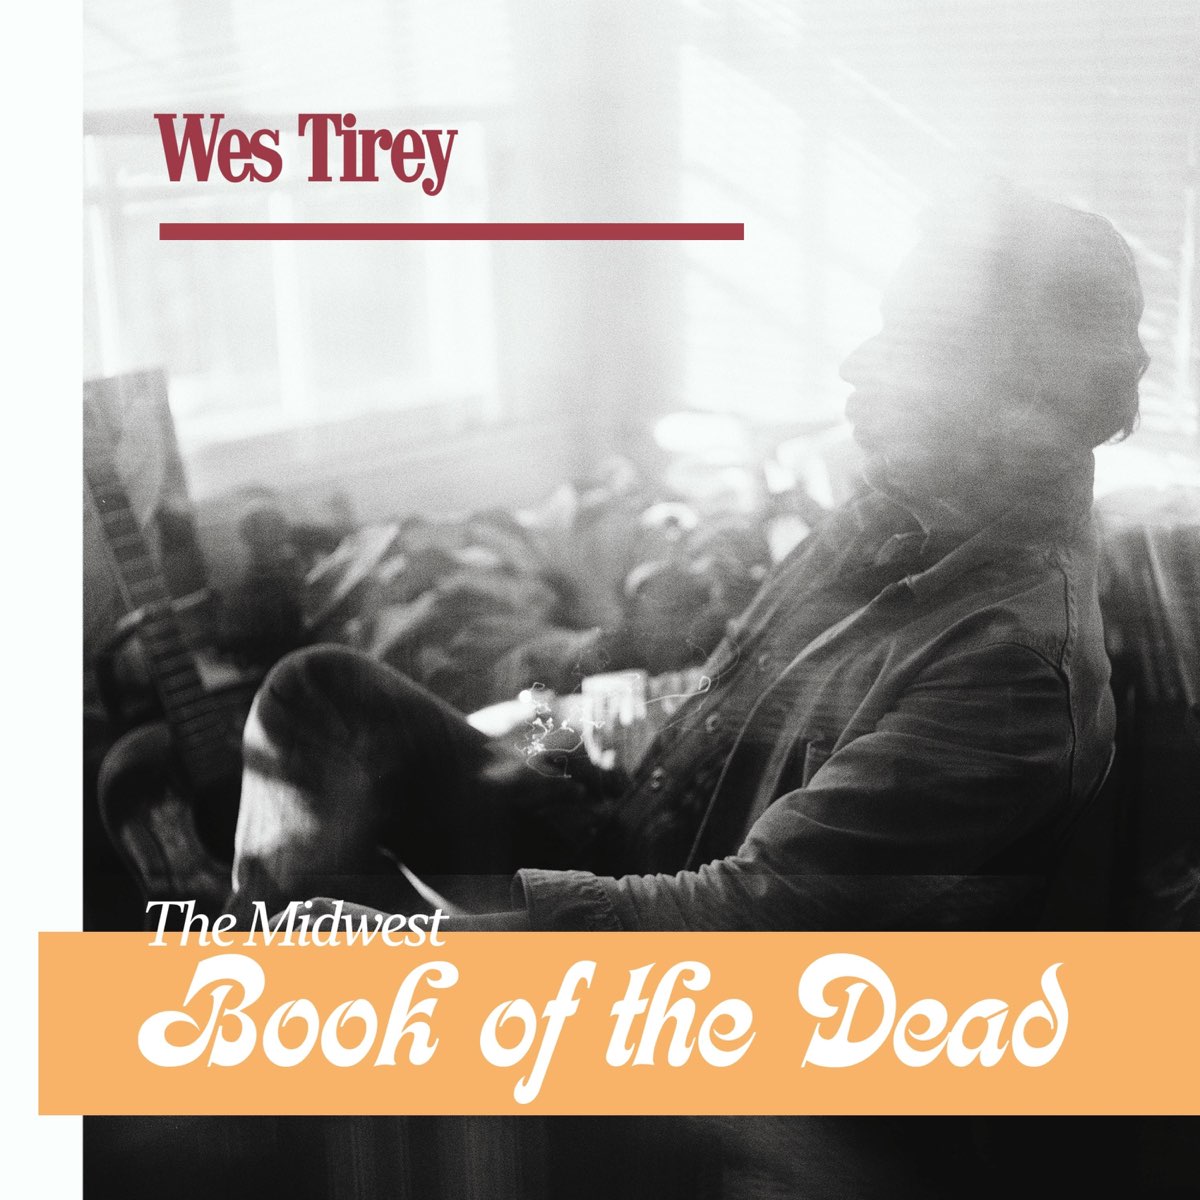 Wes Tirey "The Midwest Book of the Dead" LP